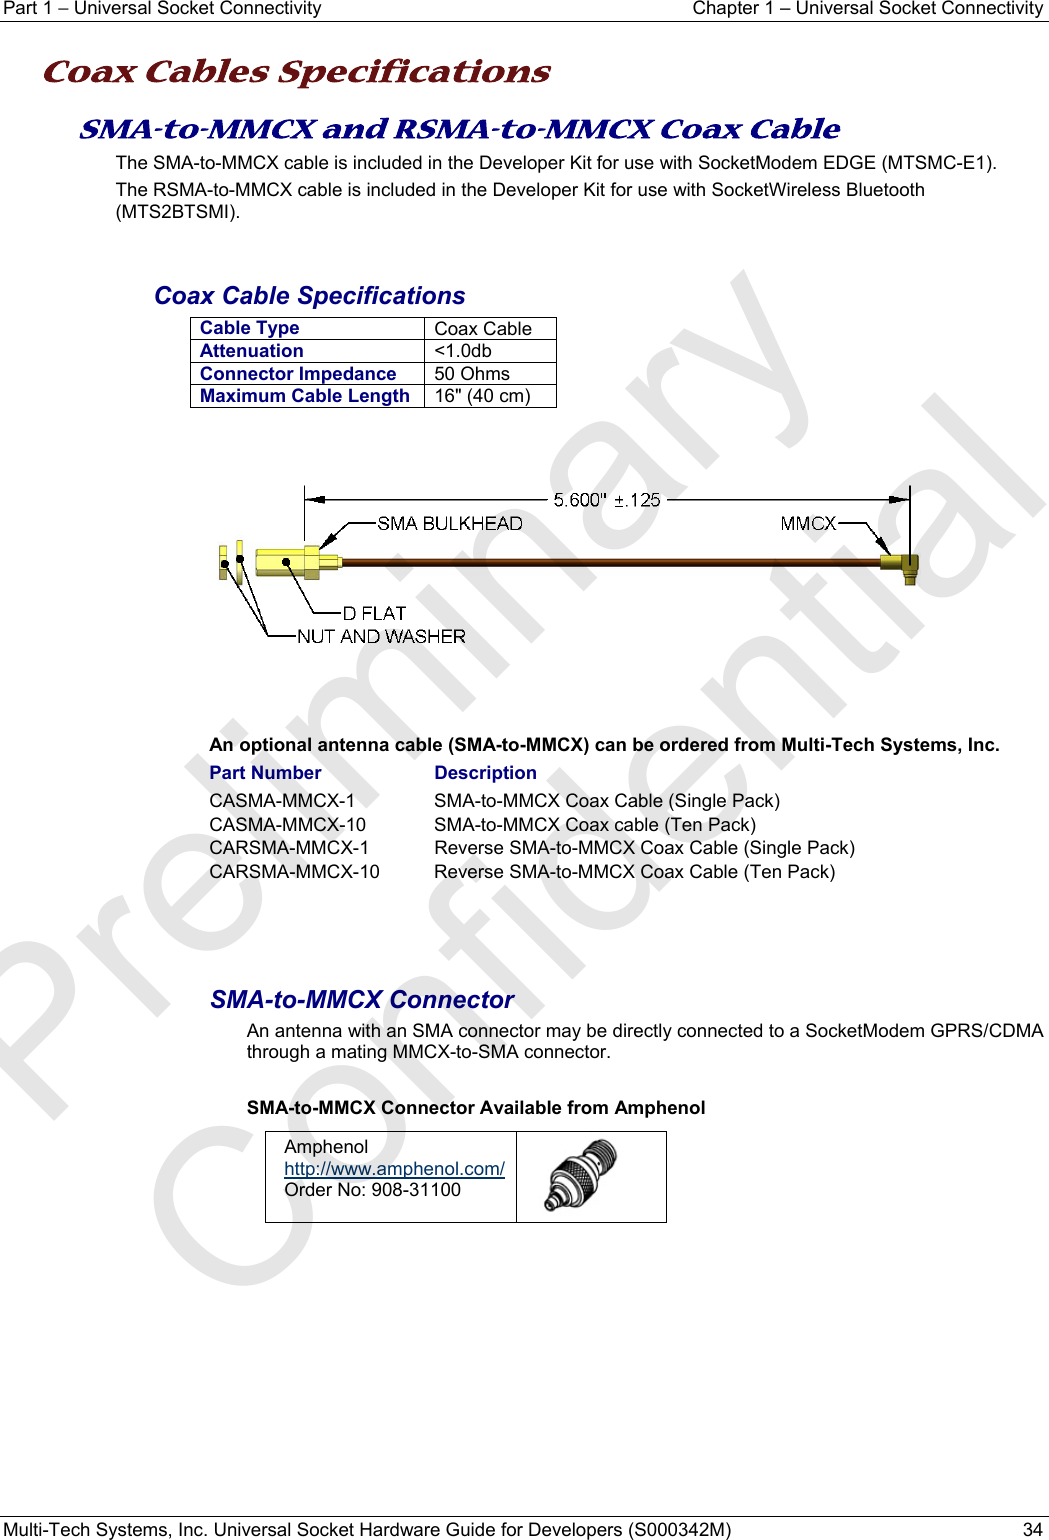 Part 1 − Universal Socket Connectivity  Chapter 1 – Universal Socket Connectivity Multi-Tech Systems, Inc. Universal Socket Hardware Guide for Developers (S000342M)  34  Coax Cables Specifications SMA-to-MMCX and RSMA-to-MMCX Coax Cable The SMA-to-MMCX cable is included in the Developer Kit for use with SocketModem EDGE (MTSMC-E1). The RSMA-to-MMCX cable is included in the Developer Kit for use with SocketWireless Bluetooth (MTS2BTSMI).   Coax Cable Specifications Cable Type  Coax Cable Attenuation  &lt;1.0db Connector Impedance 50 Ohms Maximum Cable Length 16&quot; (40 cm)        An optional antenna cable (SMA-to-MMCX) can be ordered from Multi-Tech Systems, Inc.  Part Number    Description CASMA-MMCX-1     SMA-to-MMCX Coax Cable (Single Pack) CASMA-MMCX-10     SMA-to-MMCX Coax cable (Ten Pack) CARSMA-MMCX-1    Reverse SMA-to-MMCX Coax Cable (Single Pack) CARSMA-MMCX-10    Reverse SMA-to-MMCX Coax Cable (Ten Pack)   SMA-to-MMCX Connector An antenna with an SMA connector may be directly connected to a SocketModem GPRS/CDMA through a mating MMCX-to-SMA connector.   SMA-to-MMCX Connector Available from Amphenol Amphenol  http://www.amphenol.com/ Order No: 908-31100    Preliminary  Confidential